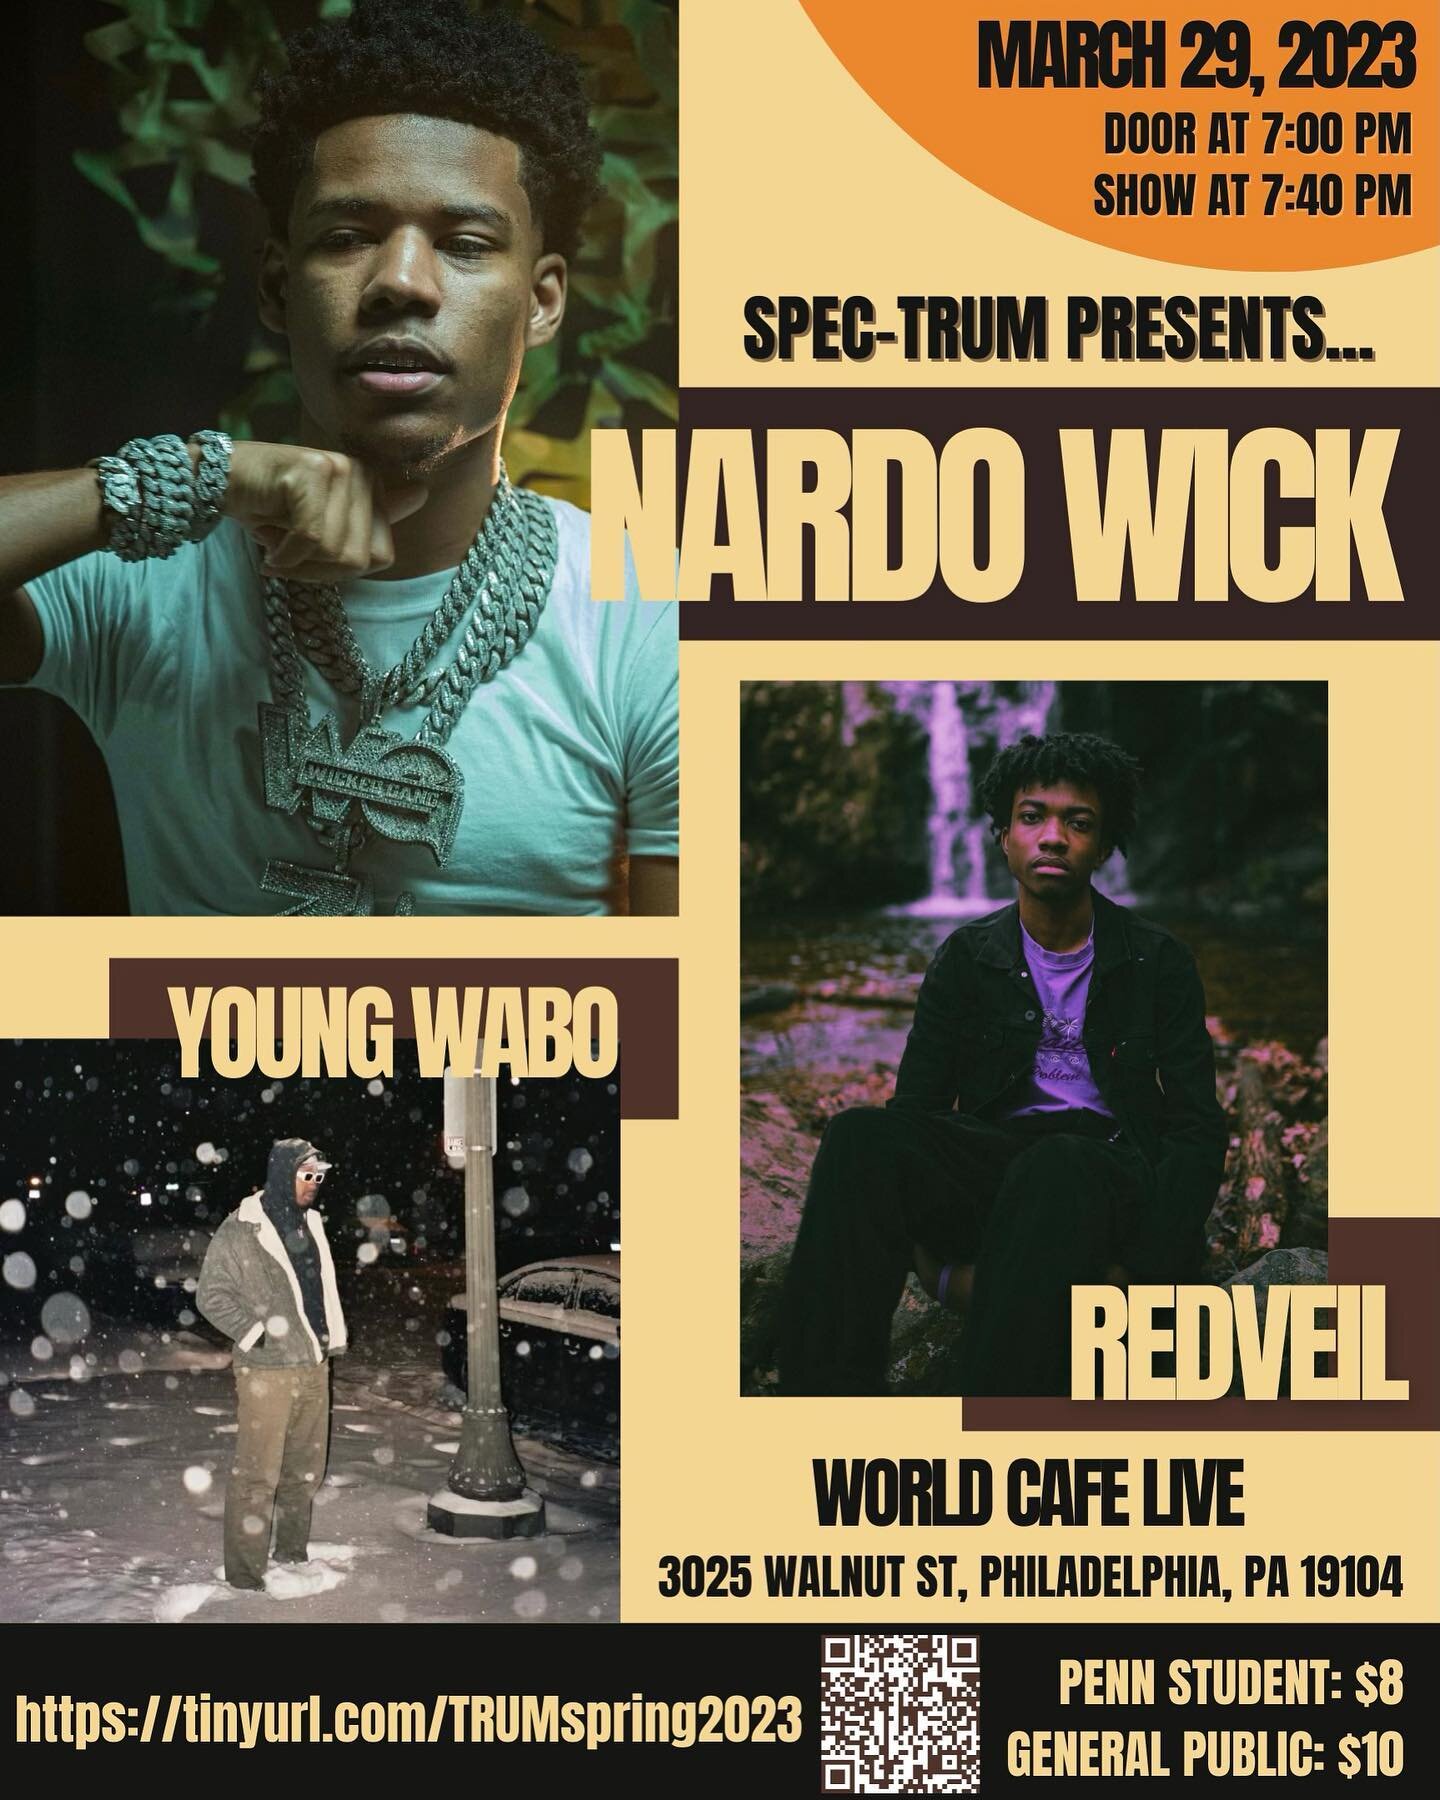 SPEC-TRUM Presents: Nardo Wick ft. Redveil and Young Wabo on March 29th at World Cafe Live🔊 Ticket link in Bio!! $8 for students and $10 for general public